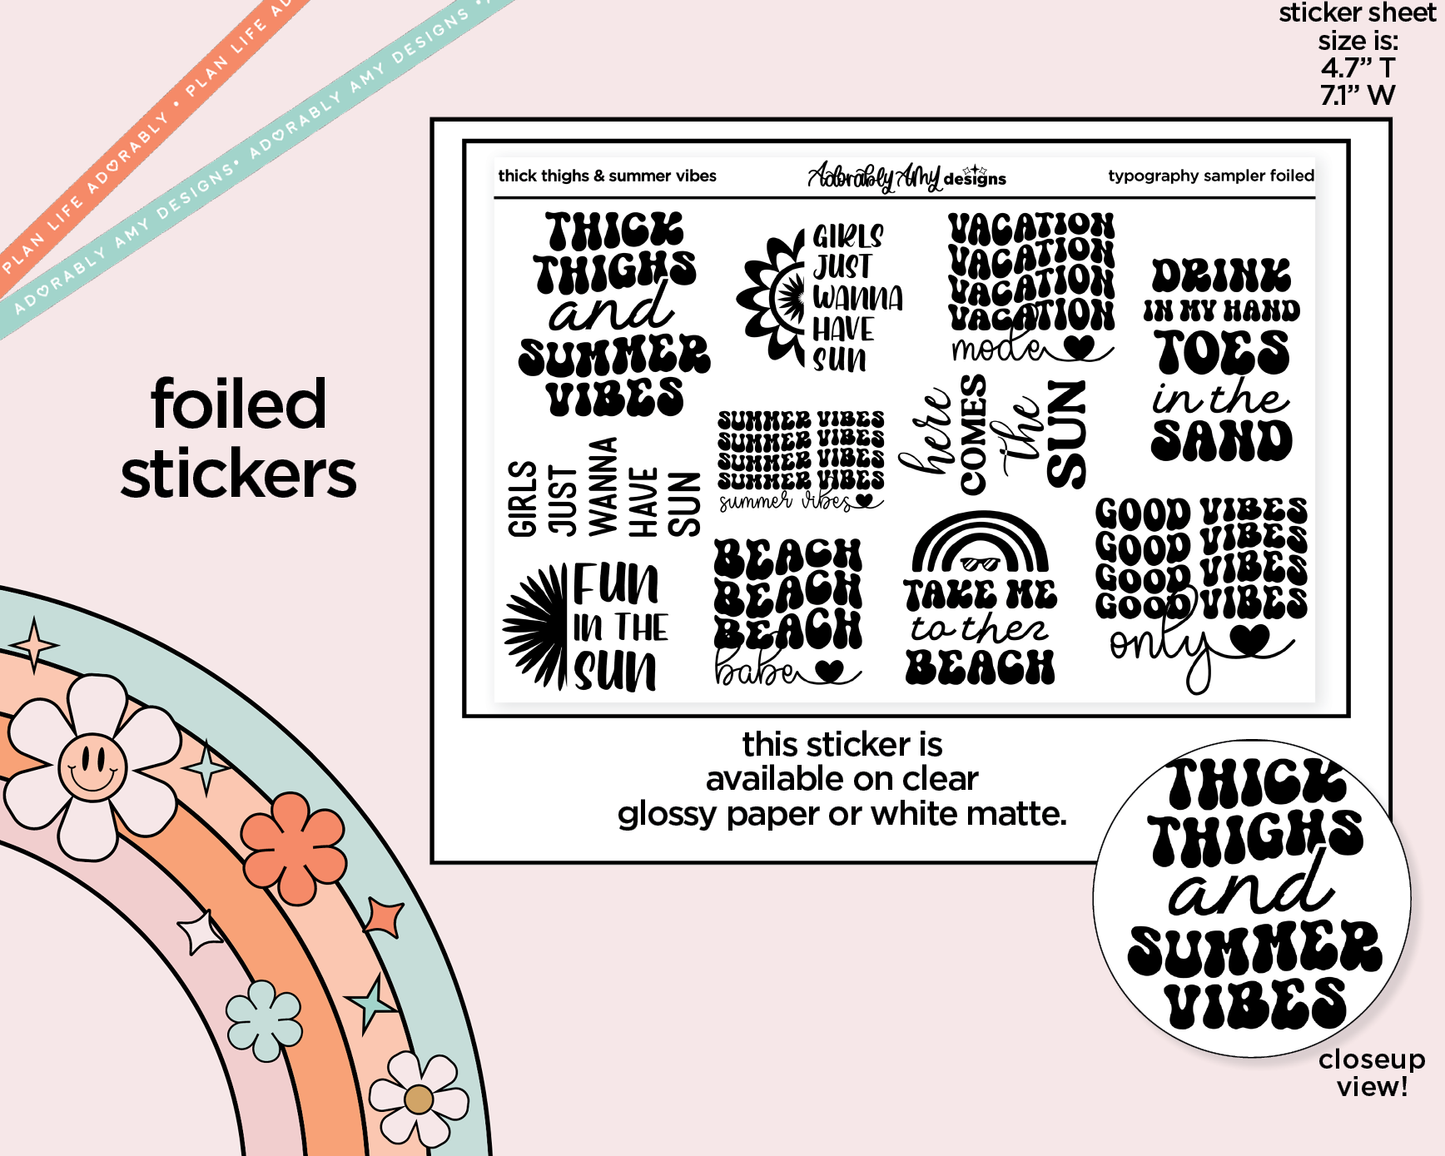 Foiled Thick Thighs and Summer Vibes Deco Typography Sampler Planner Stickers